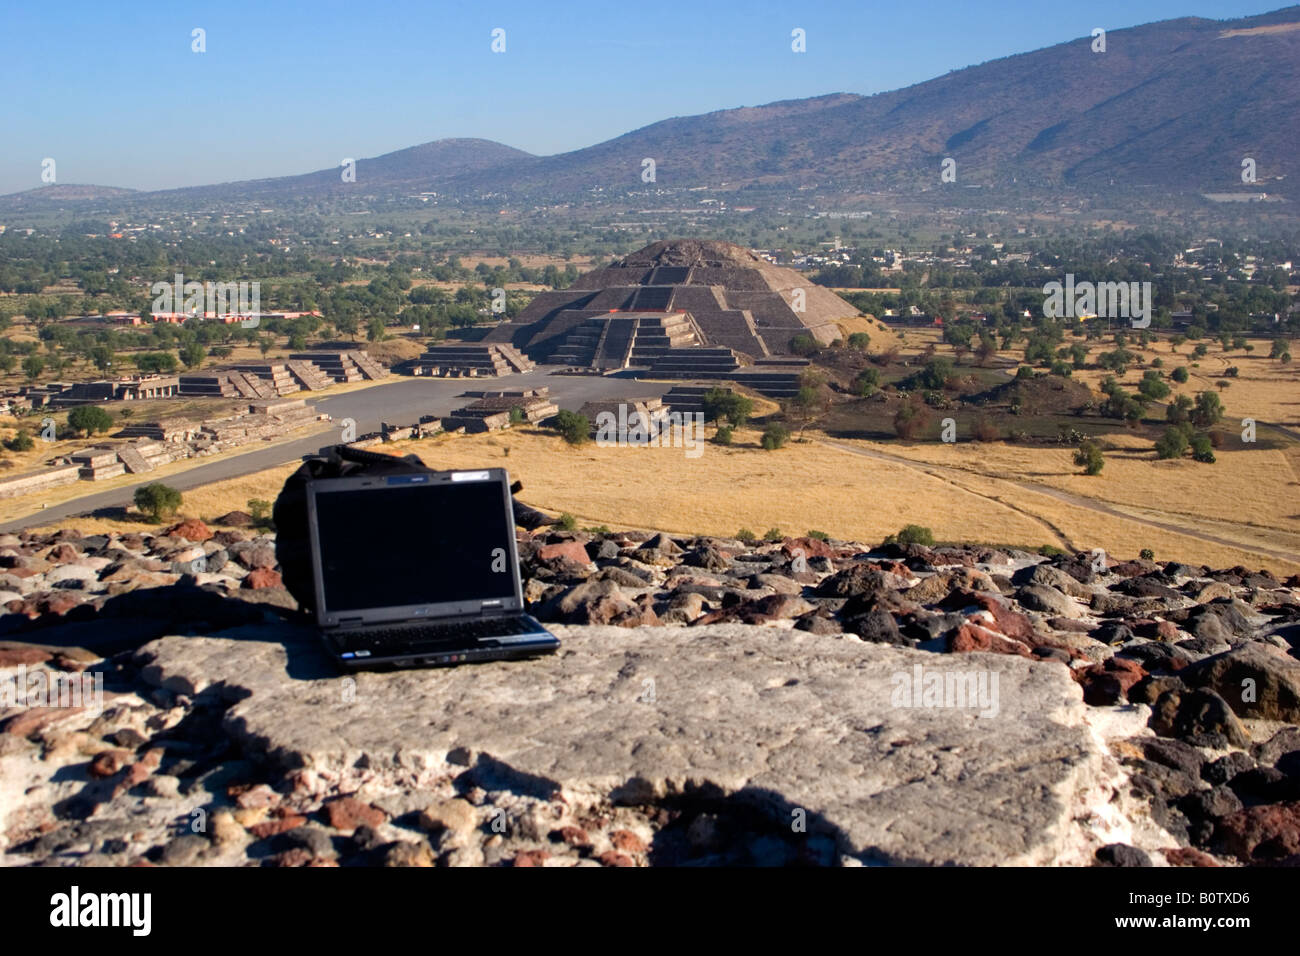 Checking for hotspots on the Pramid of the Sun, Teotihuacan, Mexico Stock Photo